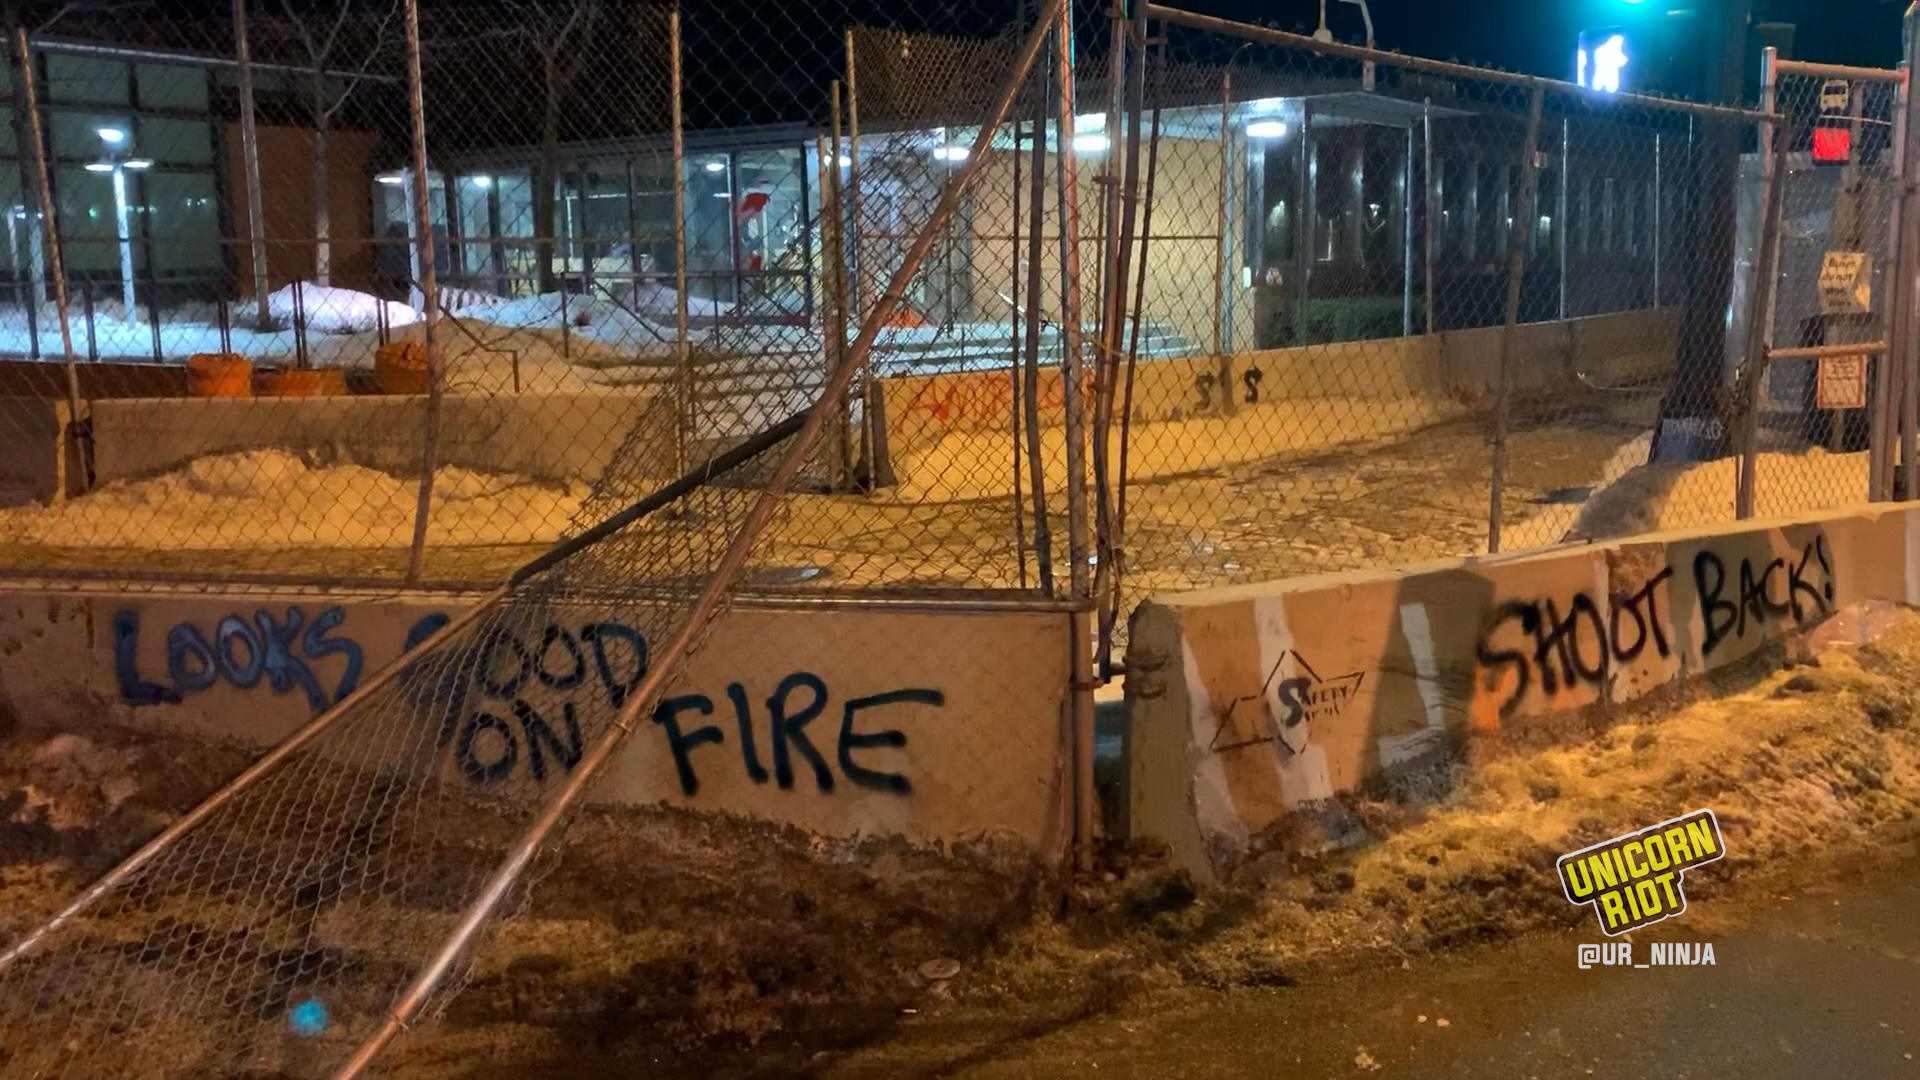 First layer of fencing around MPD's 5th Precinct was halfway torn down by protesters during February 11 march for Amir Locke